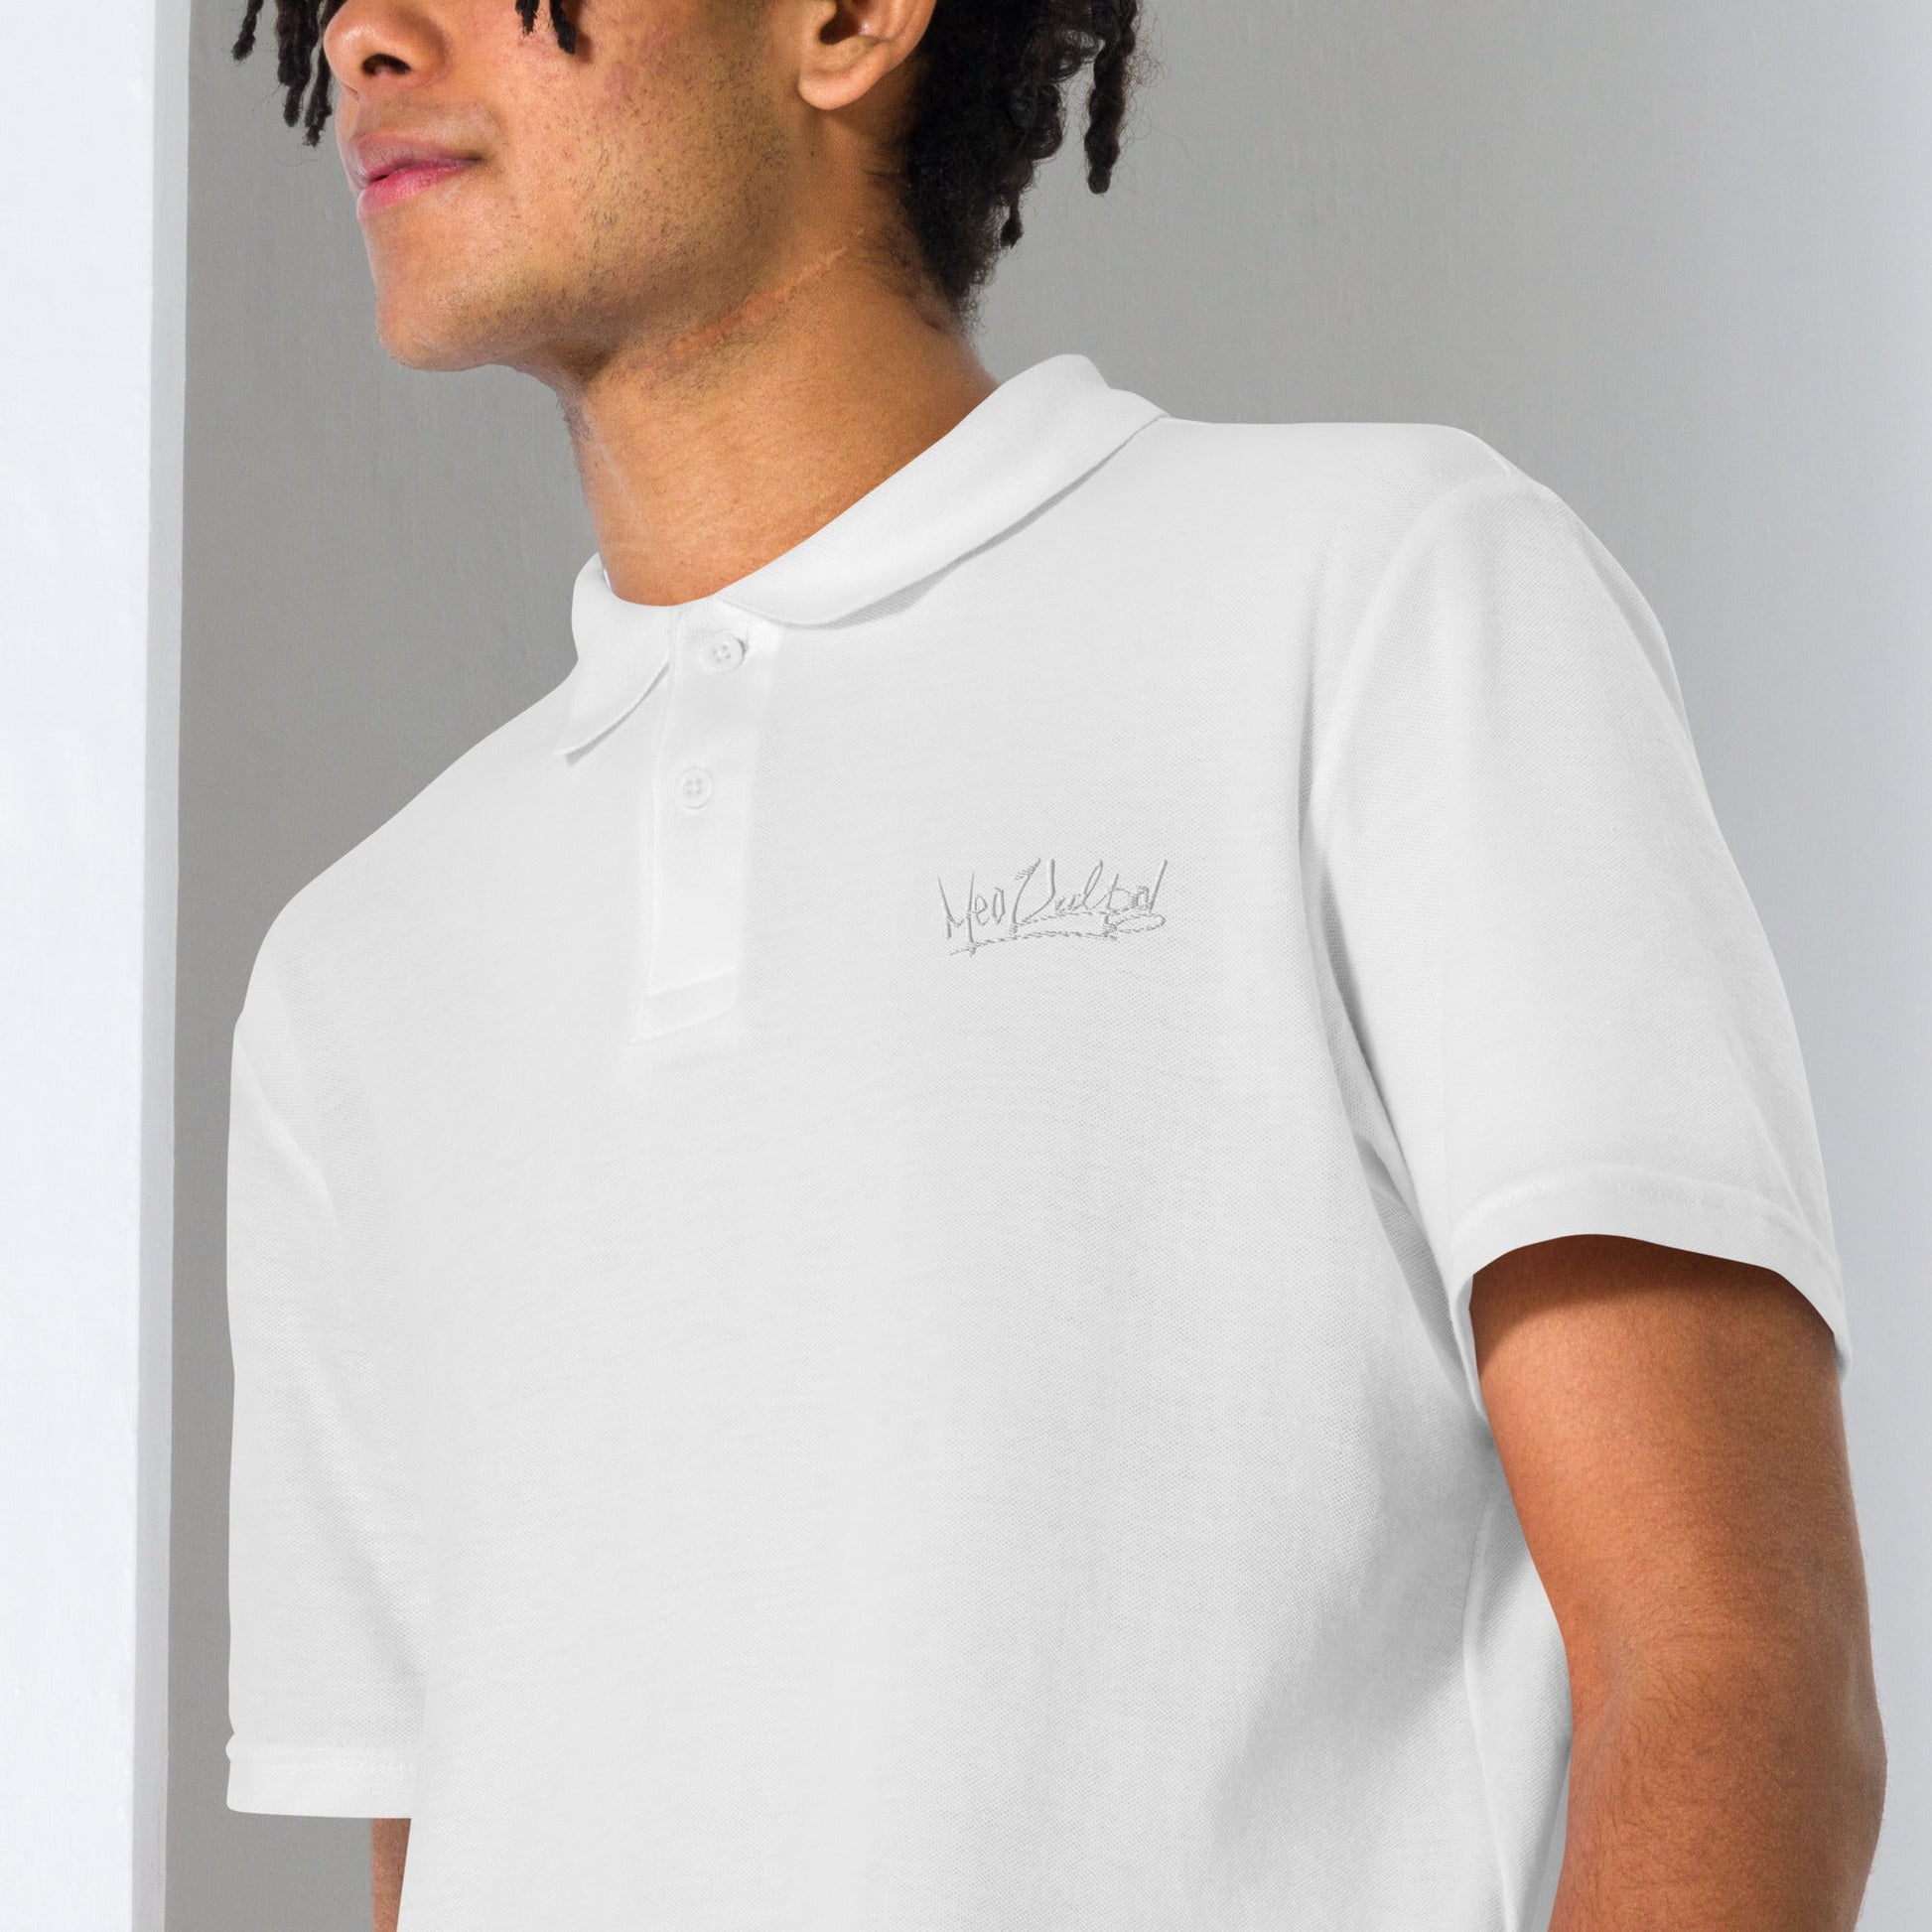 Embrace effortless elegance with the MeaKulpa Unisex Pique Polo Shirt in White. Made from high-quality ring-spun cotton, this shirt combines comfort with timeless style. Its semi-fitted silhouette and classic collar make it a versatile addition to any wardrobe. Dress it up with chinos for a smart-casual look or pair it with jeans for a relaxed weekend vibe. The perfect choice for understated sophistication. Boy side shot